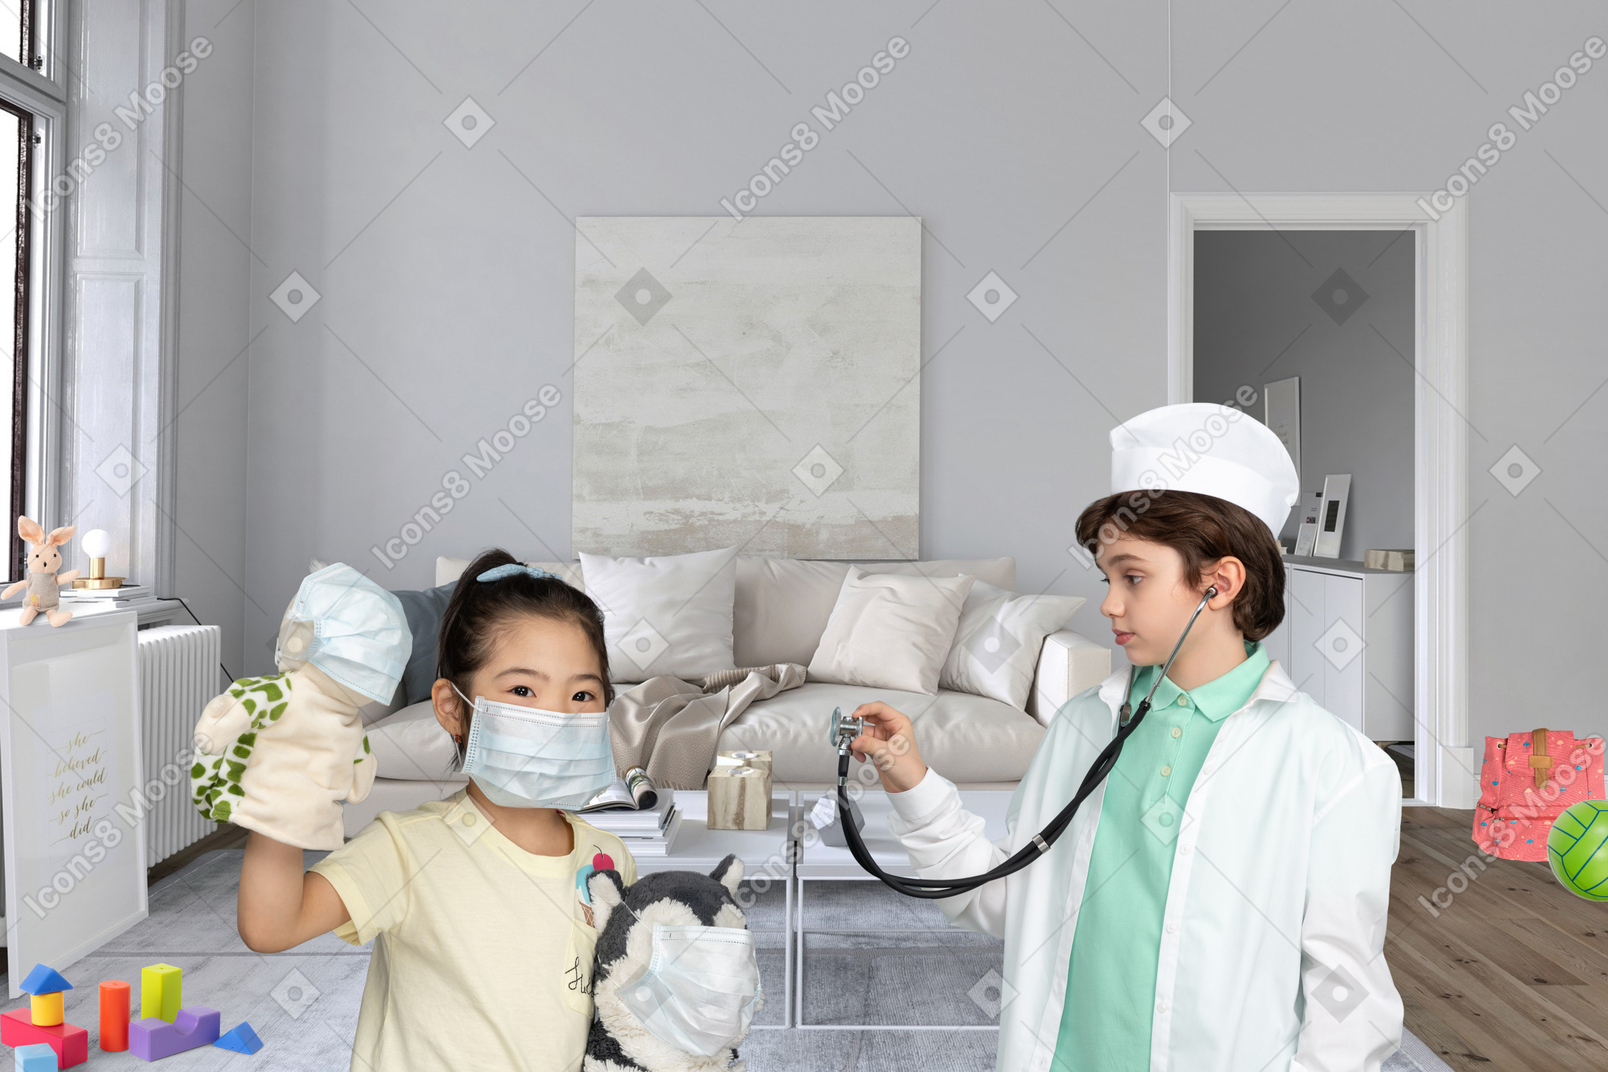 A nurse in a hospital bed